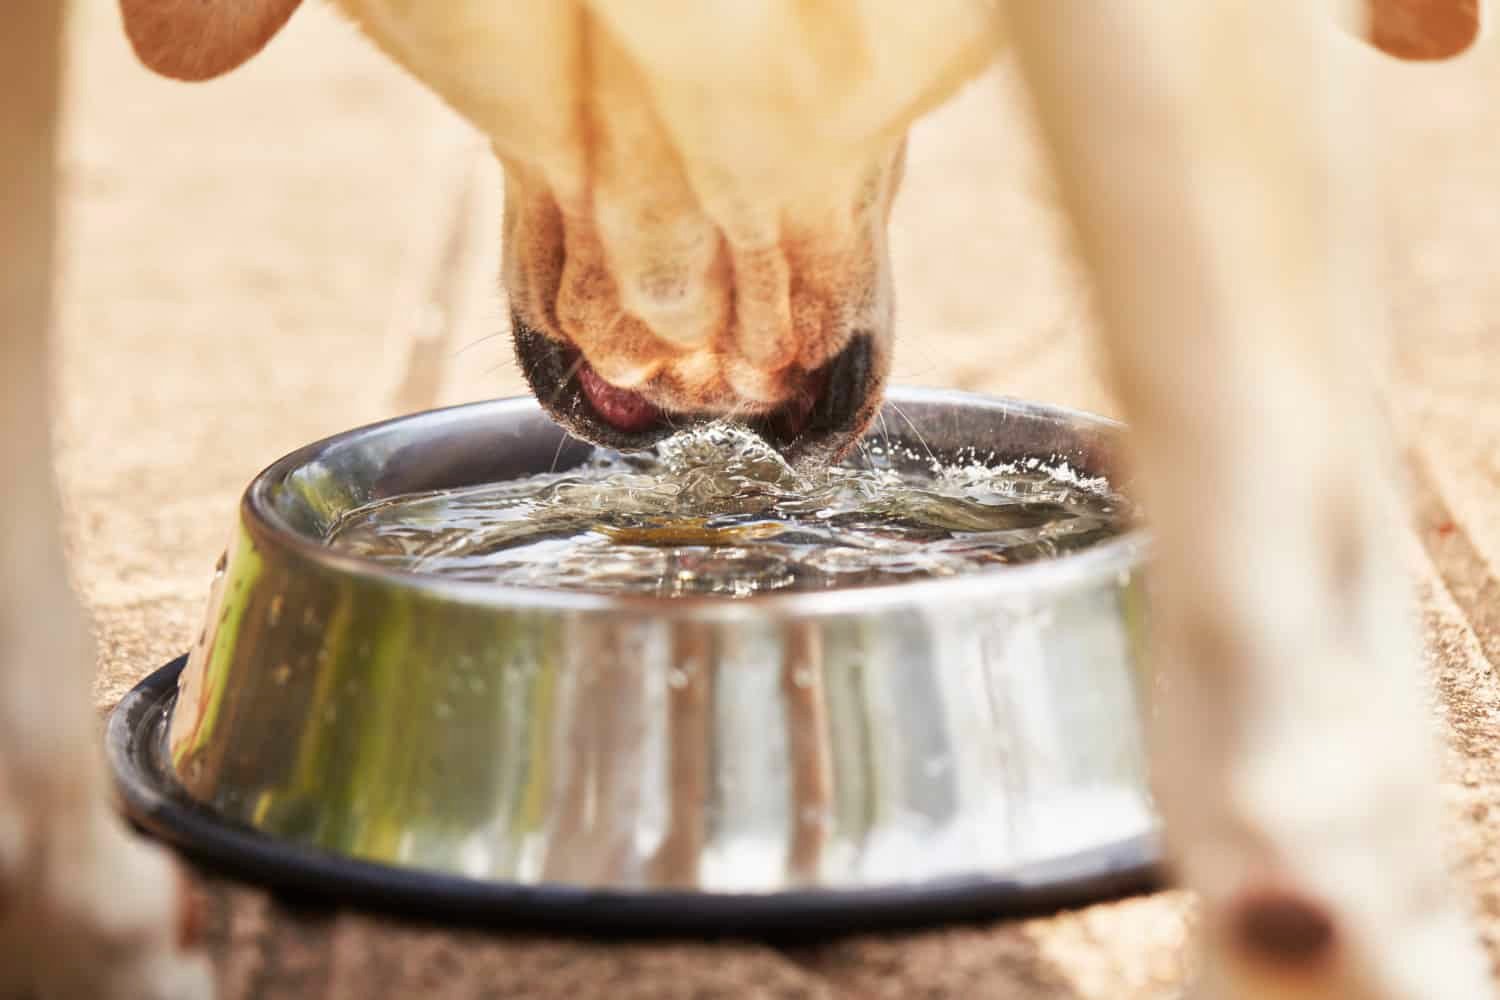 Dog drinks from water bowl